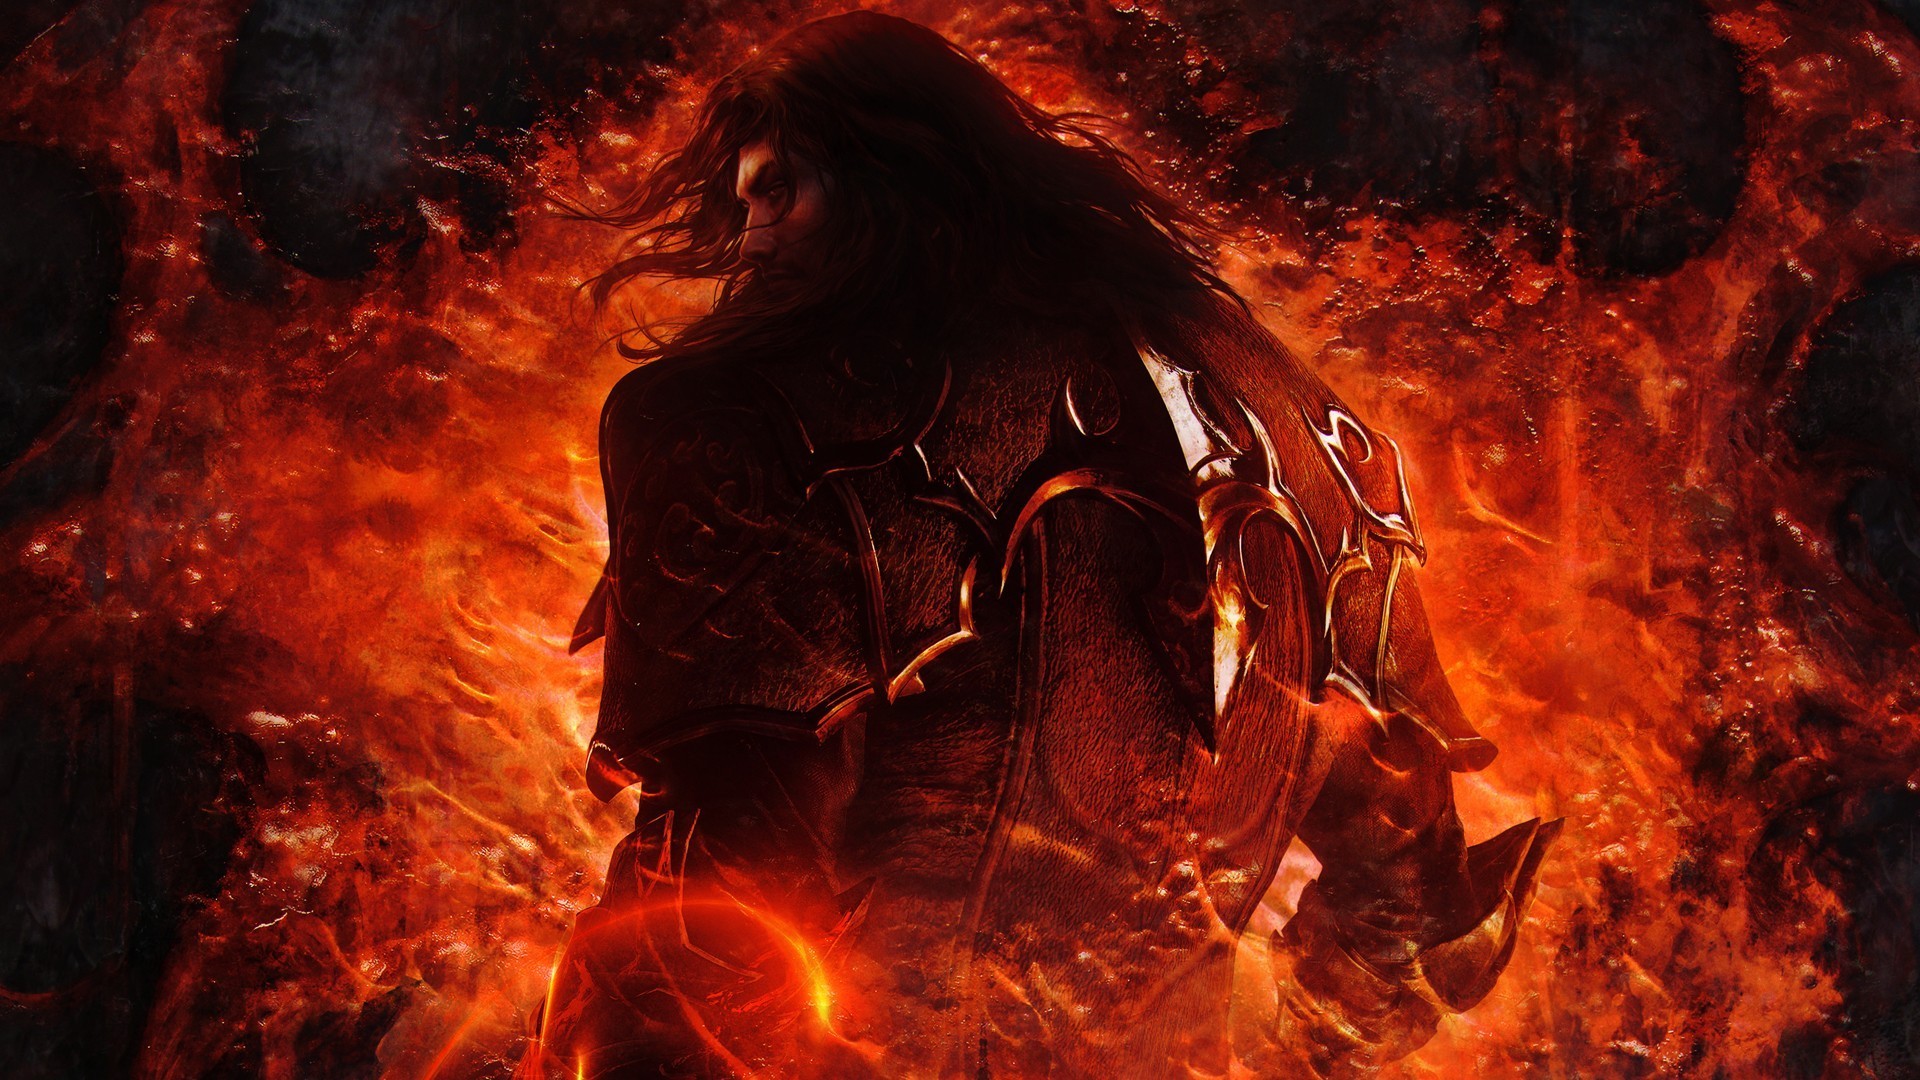 download dlc revelations castlevania lords of shadow 2 pc